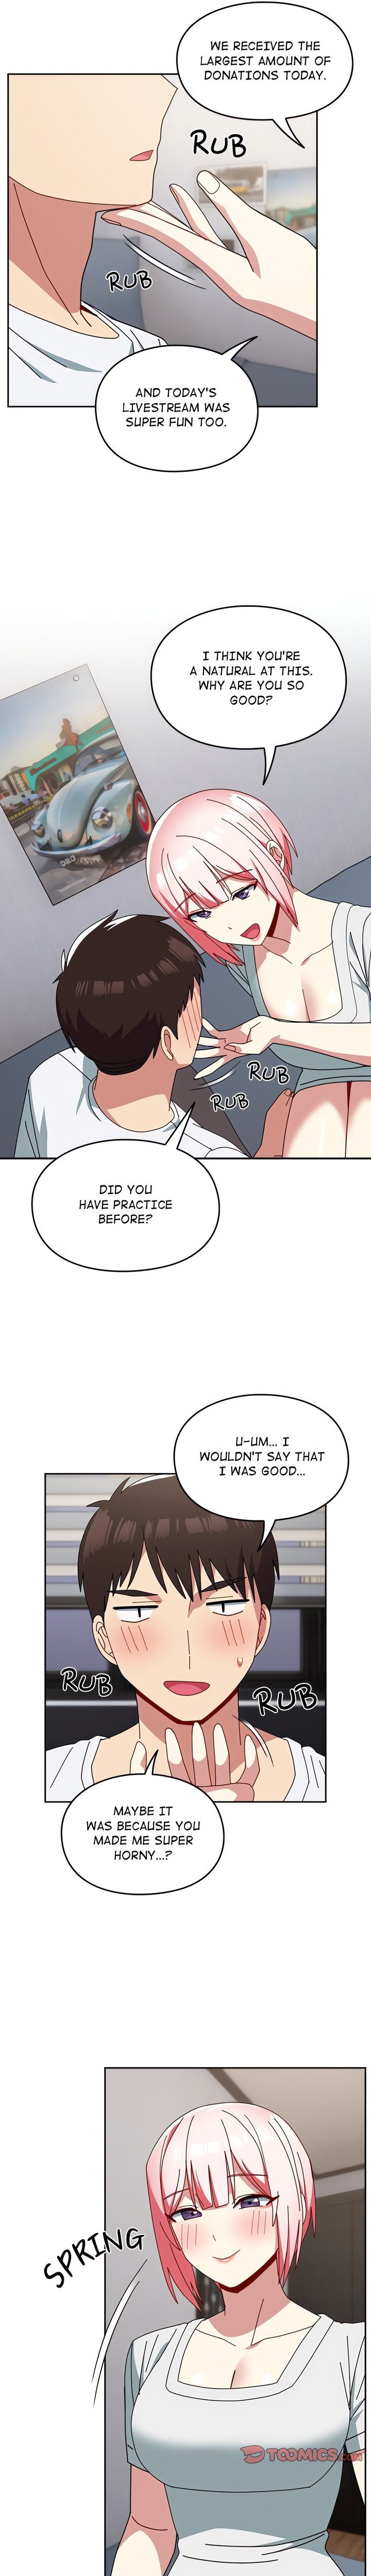 when-did-we-start-dating-chap-46-14